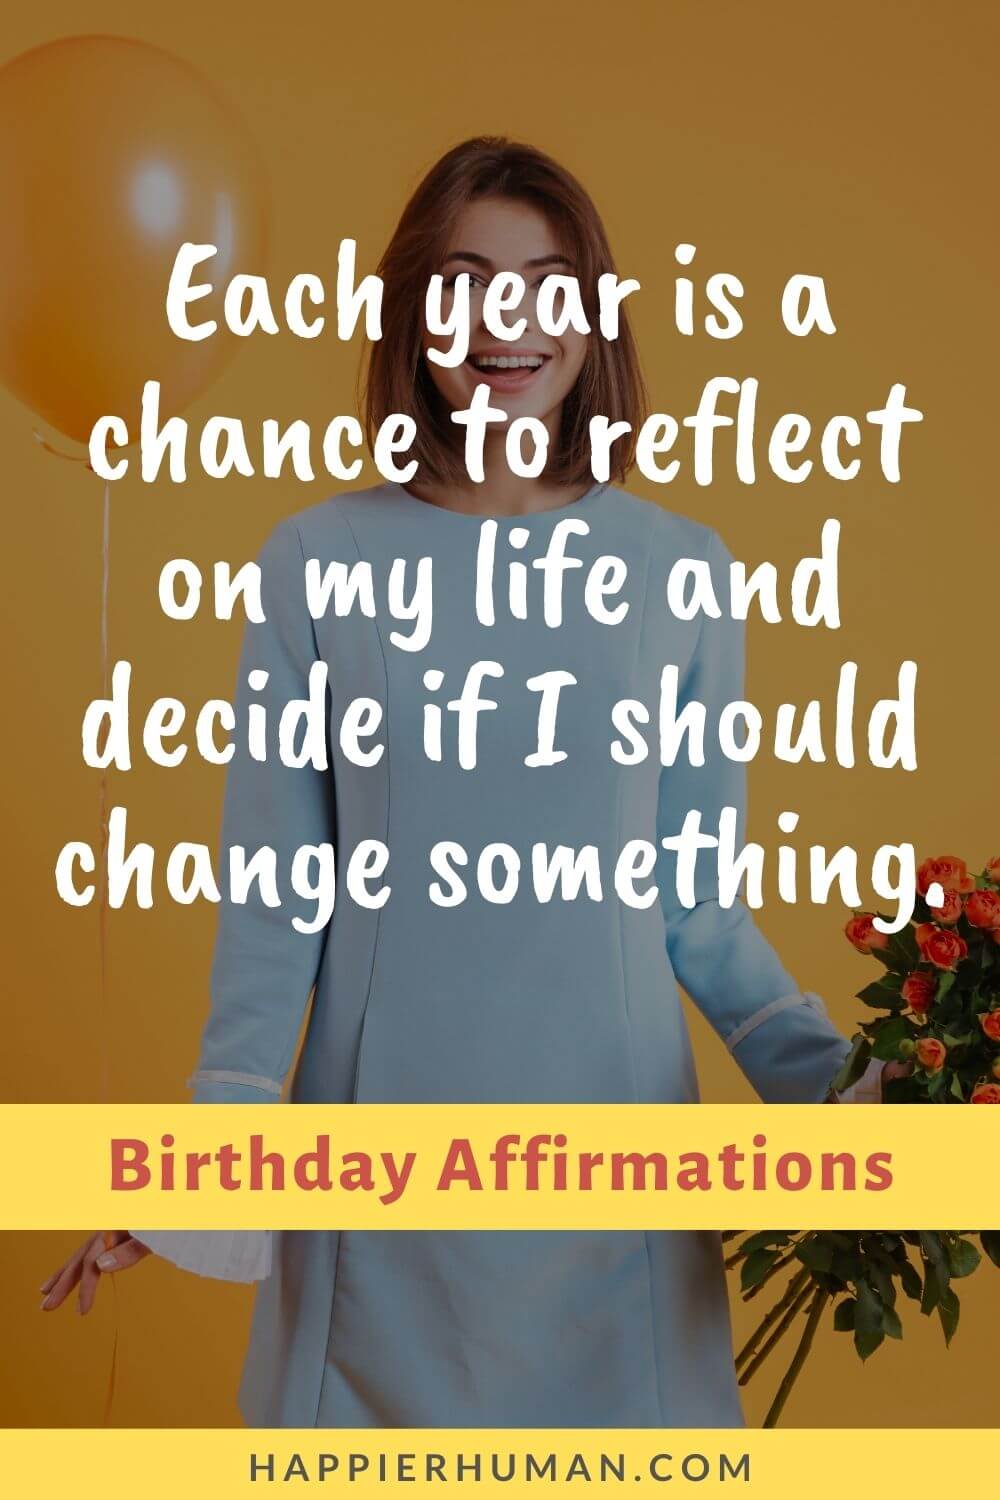 Birthday Affirmations - Each year is a chance to reflect on my life and decide if I should change something. | birthday affirmations for women | birthday affirmations for husband | birthday wishes